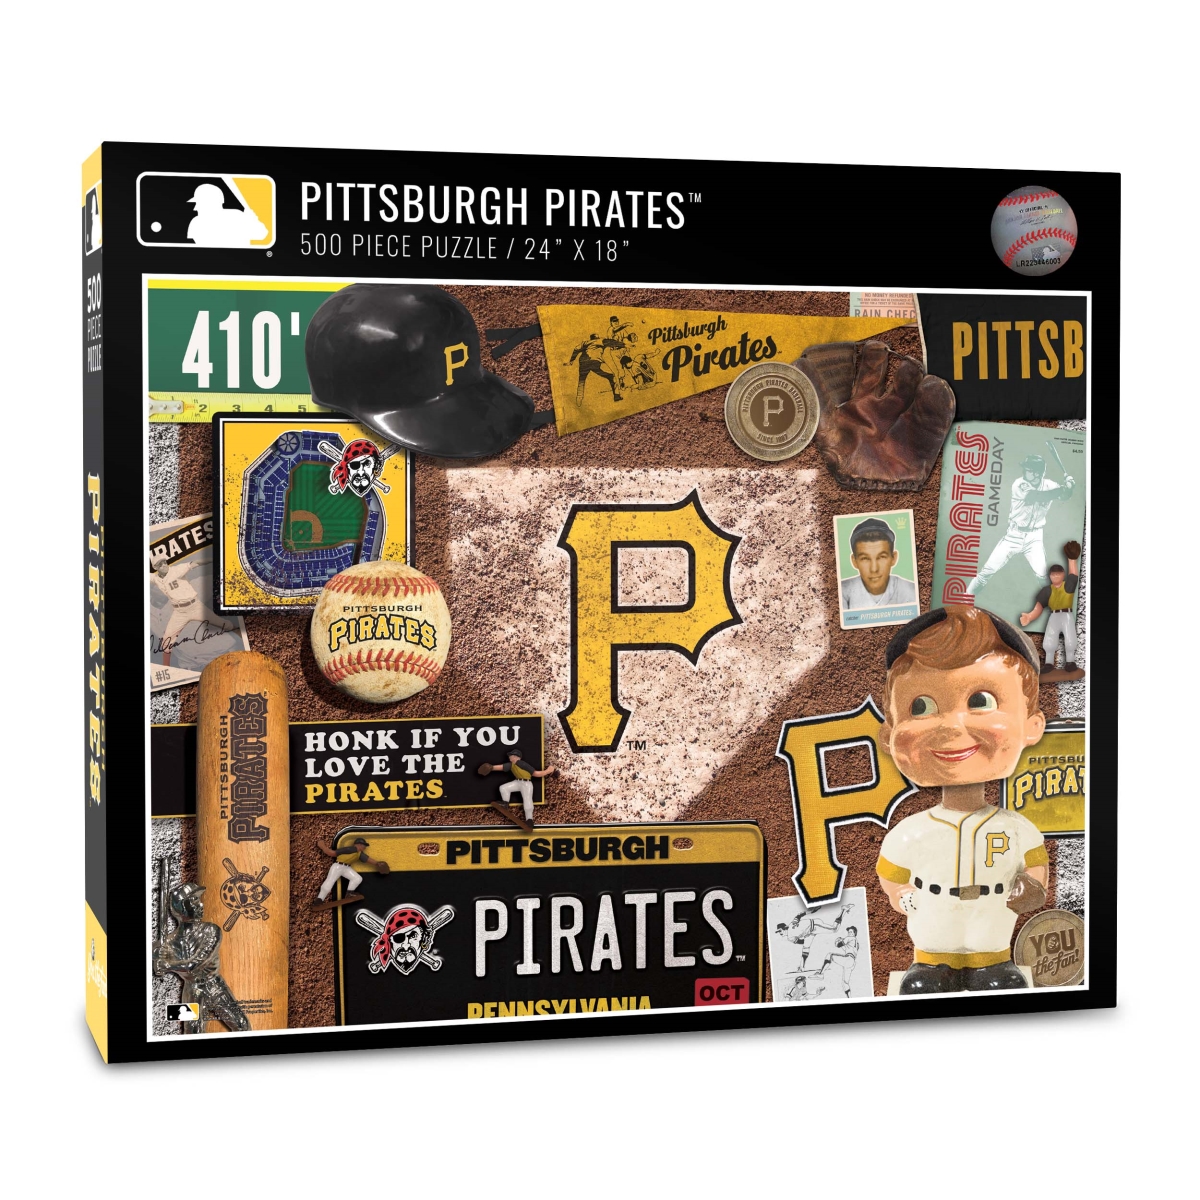 Picture of YouTheFan 0951155 18 x 24 in. MLB Pittsburgh Pirates Retro Series Puzzle - 500 Piece